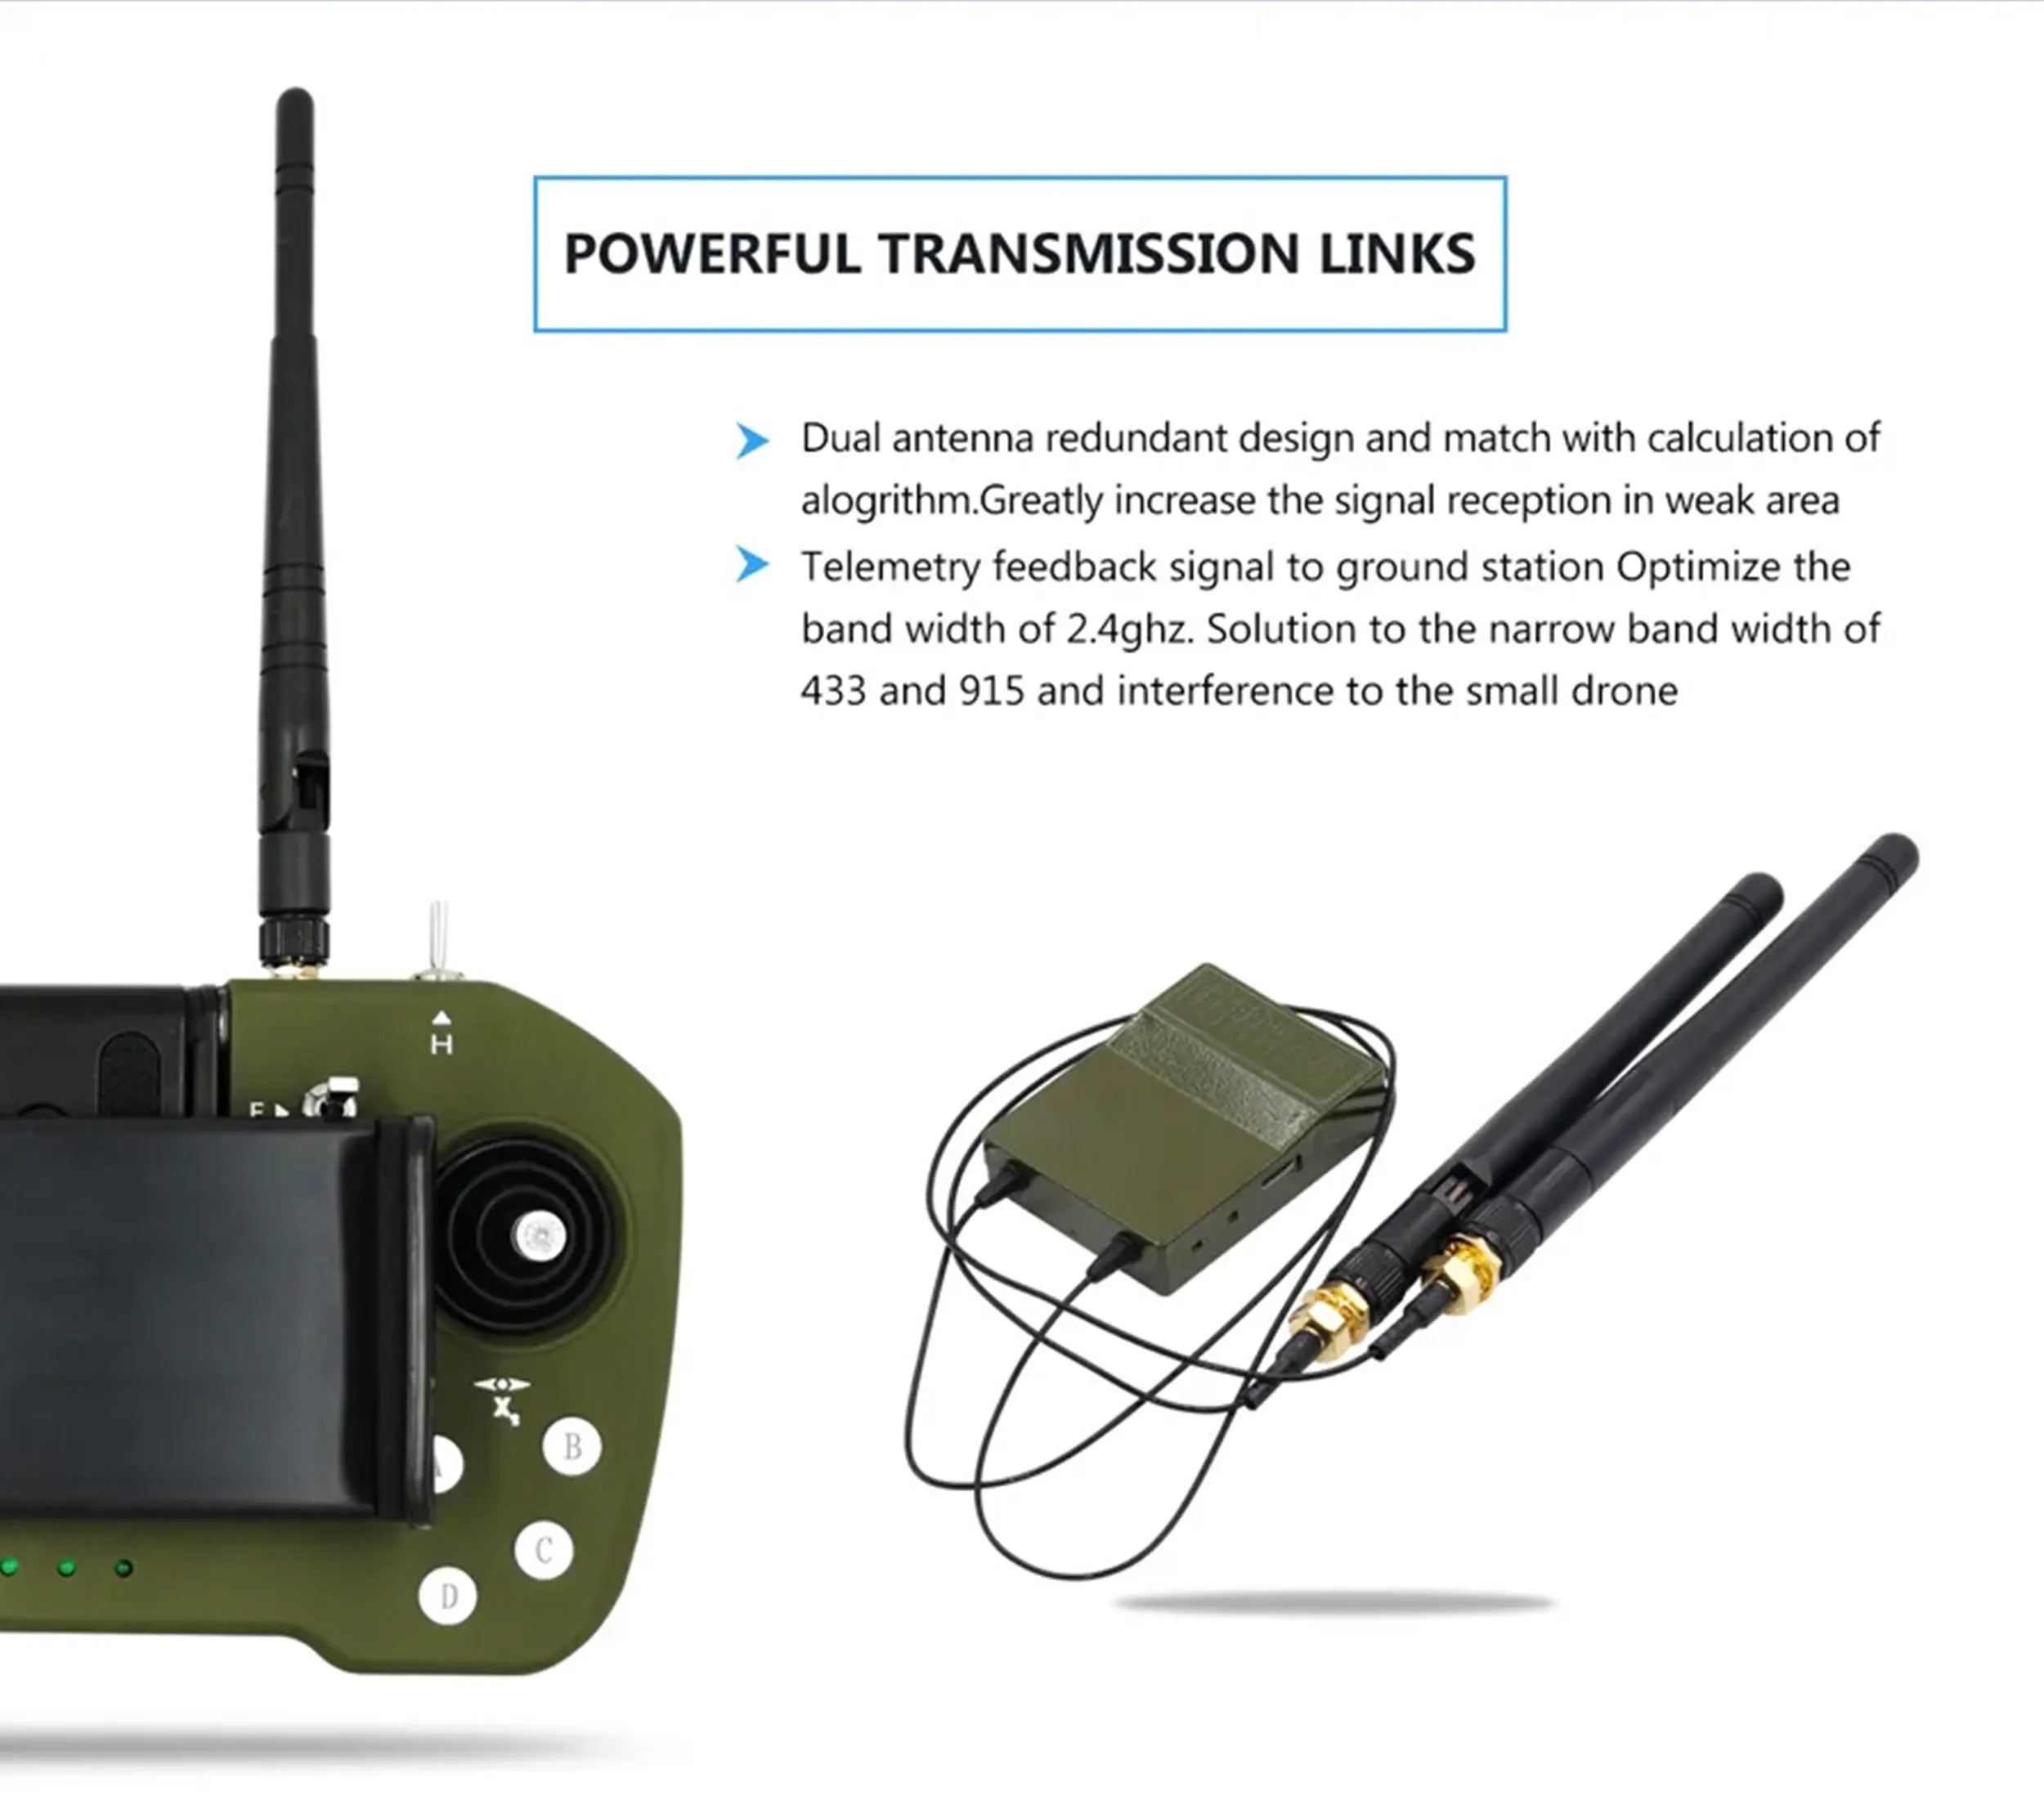 Skydroid M12L, Robust signal reception in weak areas with dual antenna design and optimized telemetry feedback.